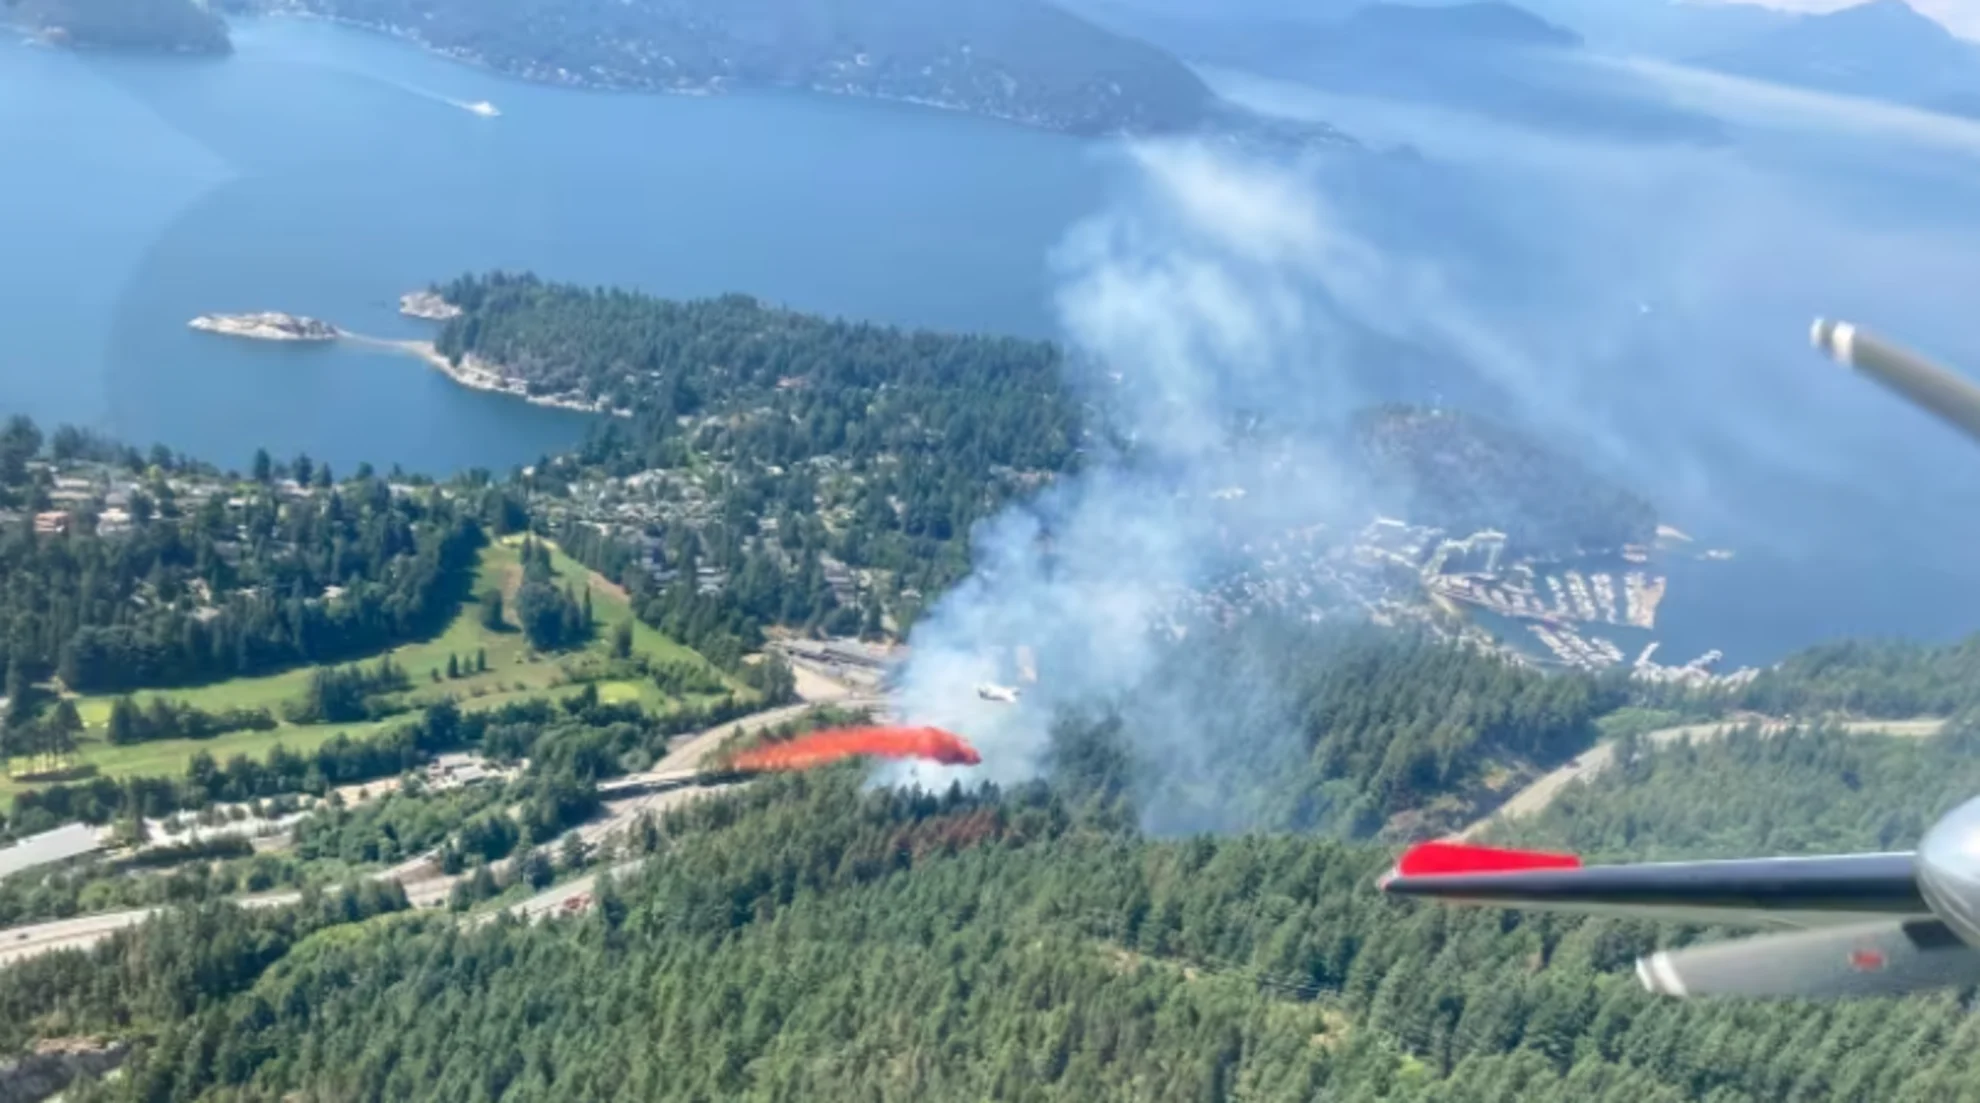 Sea-to-Sky Hwy reopens to southbound traffic as crews hold grass fire